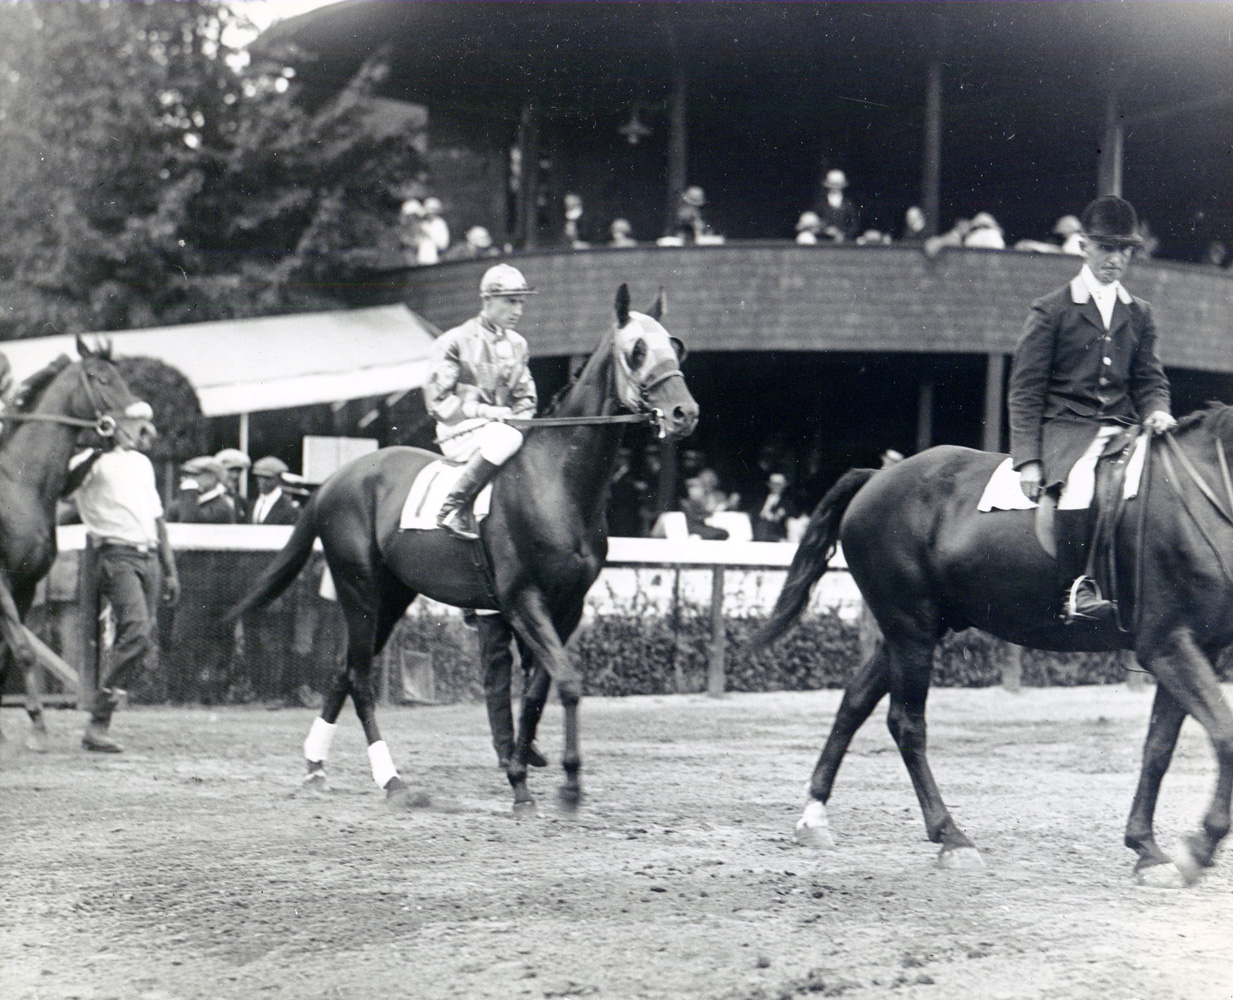 J. Linus McAtee and Bud Fisher entering the track for the 1st race at Saratoga on Aug. 11, 1922 (George S. Bolster/Museum Collection)